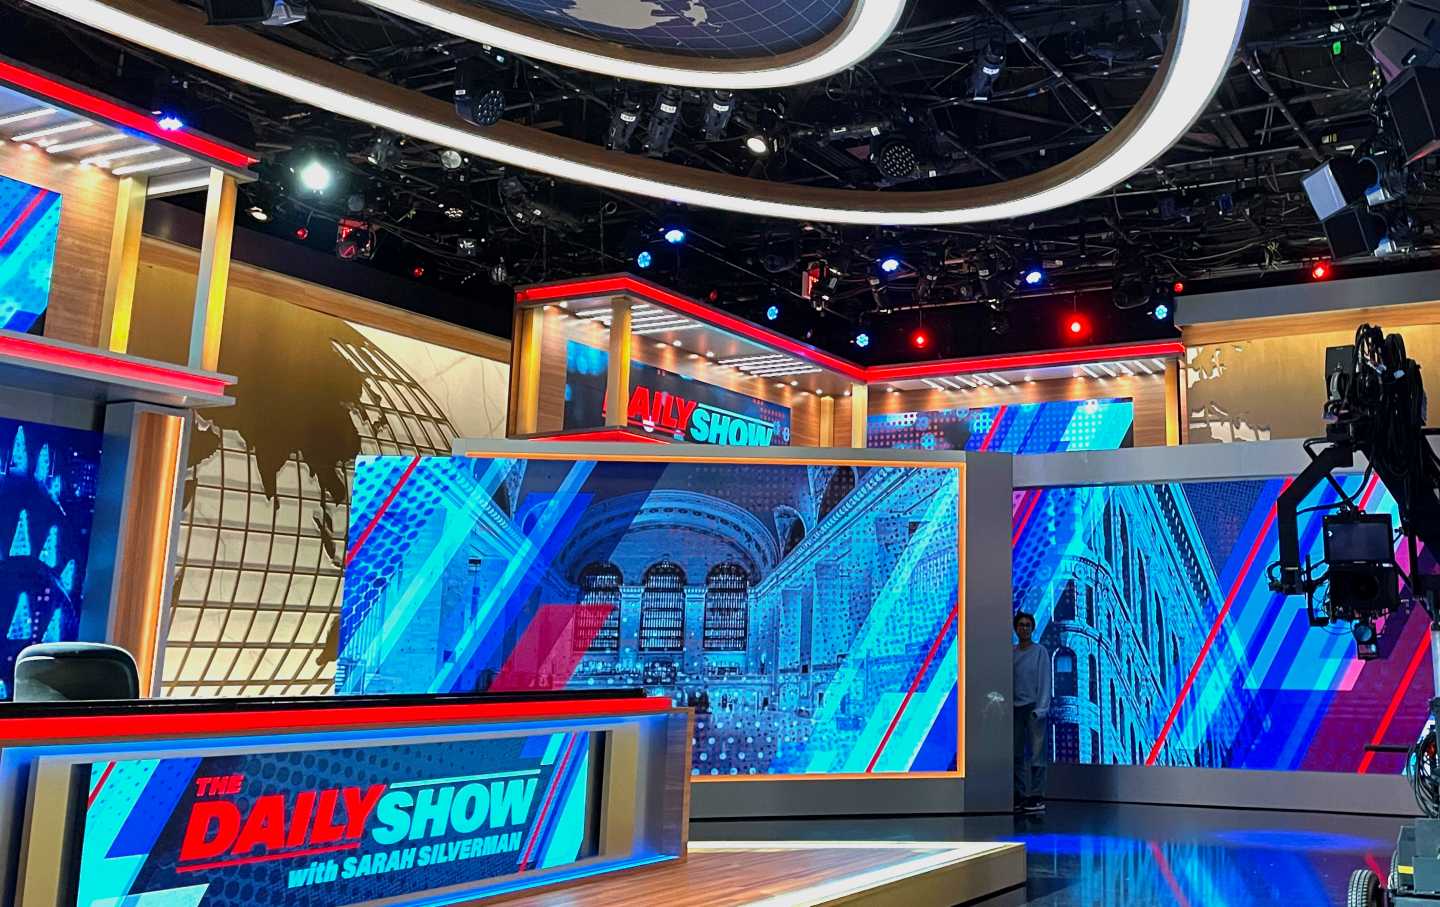 Watch while you can: The Daily Show's stage set in New York